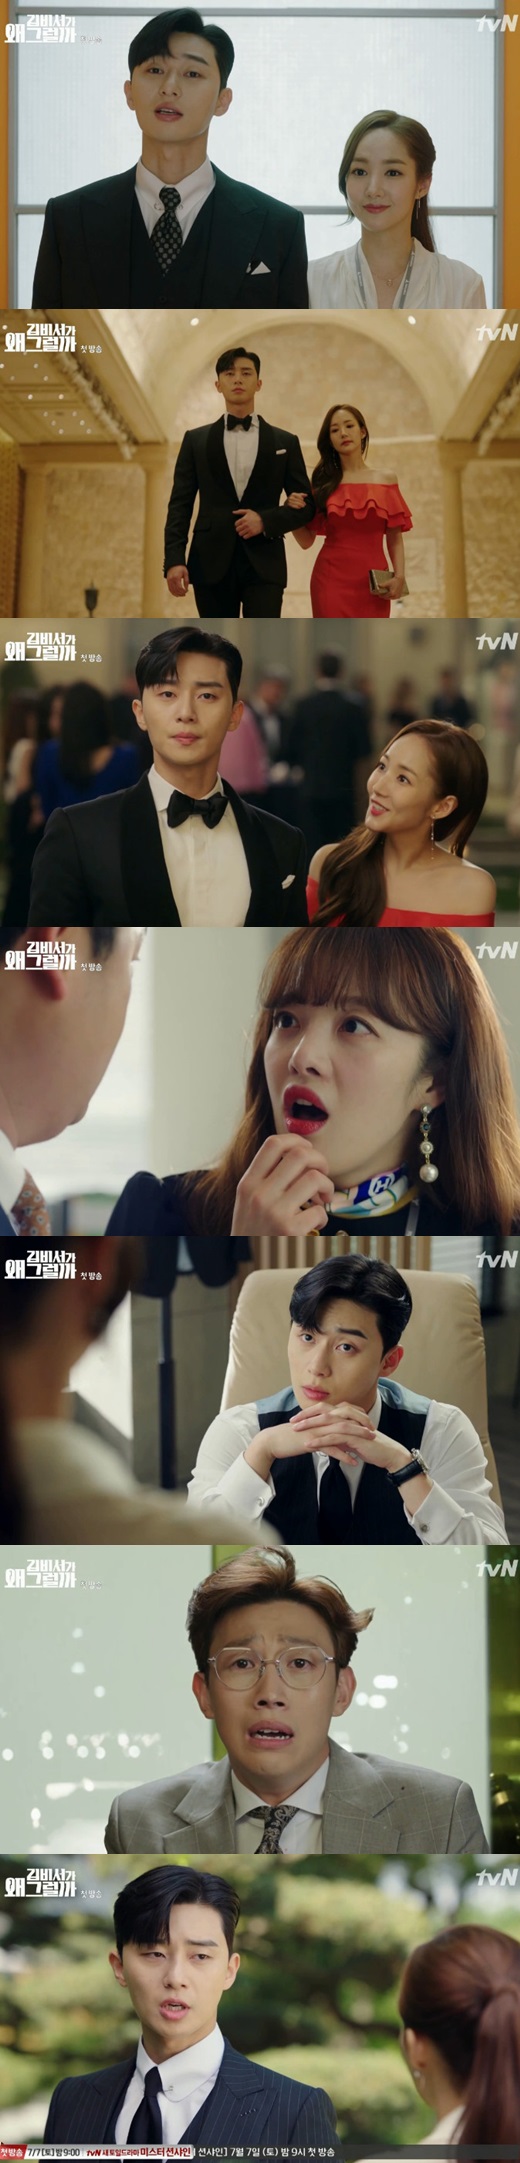 Why would Secretary Kim do that? Park Seo-joon and Park Min-young showed synchro rates that ripped off Web toon.In the first episode of the cable channel tvNs new tree drama Why is Secretary Kim doing that (playplayed by Jeong Eun-young, director Park Joon-hwa), which was first broadcast on the afternoon of the 6th, famous group Lee Yeongjun (Park Seo-joon) and Kim Bi-seo Kim Mi-so (Park Min-young) were drawn to the scene of being pushed to leave.Based on the popular web novel with 50 million views of Why is Kim Secretary?, Web tone is also popular and popular with over 200 million cumulative views and 4.88 million subscribers.It was also noticed as a new work by director Park Jun-hwa, who directed the original drama Why is Kim Secretary doing it, Lets do a ceremony and This is the first time this life.Why would Secretary Kim do that was a feast of cartoonish three-dimensional characters as if he were watching Web toon. Lee Yeongjun said, Snowy, my aura!I did not look at the narcissist aspect and did not see the women, but I was soaked in my reflection in the mirror that I laughed.Kim Mi-so, played by Park Min-young, took him by the side of Young-joon, a legendary and self-styled perfect man in the secretariat.The smile, which had been breathing perfectly anytime and anywhere, suddenly informed him that he would stop. He would go out to find his real life.Park Min-young, who has been seen through drama for a long time, attracted attention with his acting ability as well as his high synchro rate with Kim Mi-so in Web toon.In addition to the two actors, Kang Ki-young of Park Yoo-sik, Ye-jin of Kim Ji-ah, Choi Hye-ok and Kim Byeong-ok of Lee, and Hwang Bo Ra of Bongsera added fun to the performances of actors.Kim Byeong-ok, who has appeared as a comic father in the drama Sound of the Heart, which was based on Web toon, also played a role in Why is Kim Secretary?In addition, as Park Min-young mentioned at the production presentation, Hwang Bo Ra is really fun, the comic performance of Hwang Bo Ra peaked and made me look forward to the future.Park Seo-joon said at the production presentation, Lee Yeongjuns role has come very attractive, I thought there would be a lot of things to express.